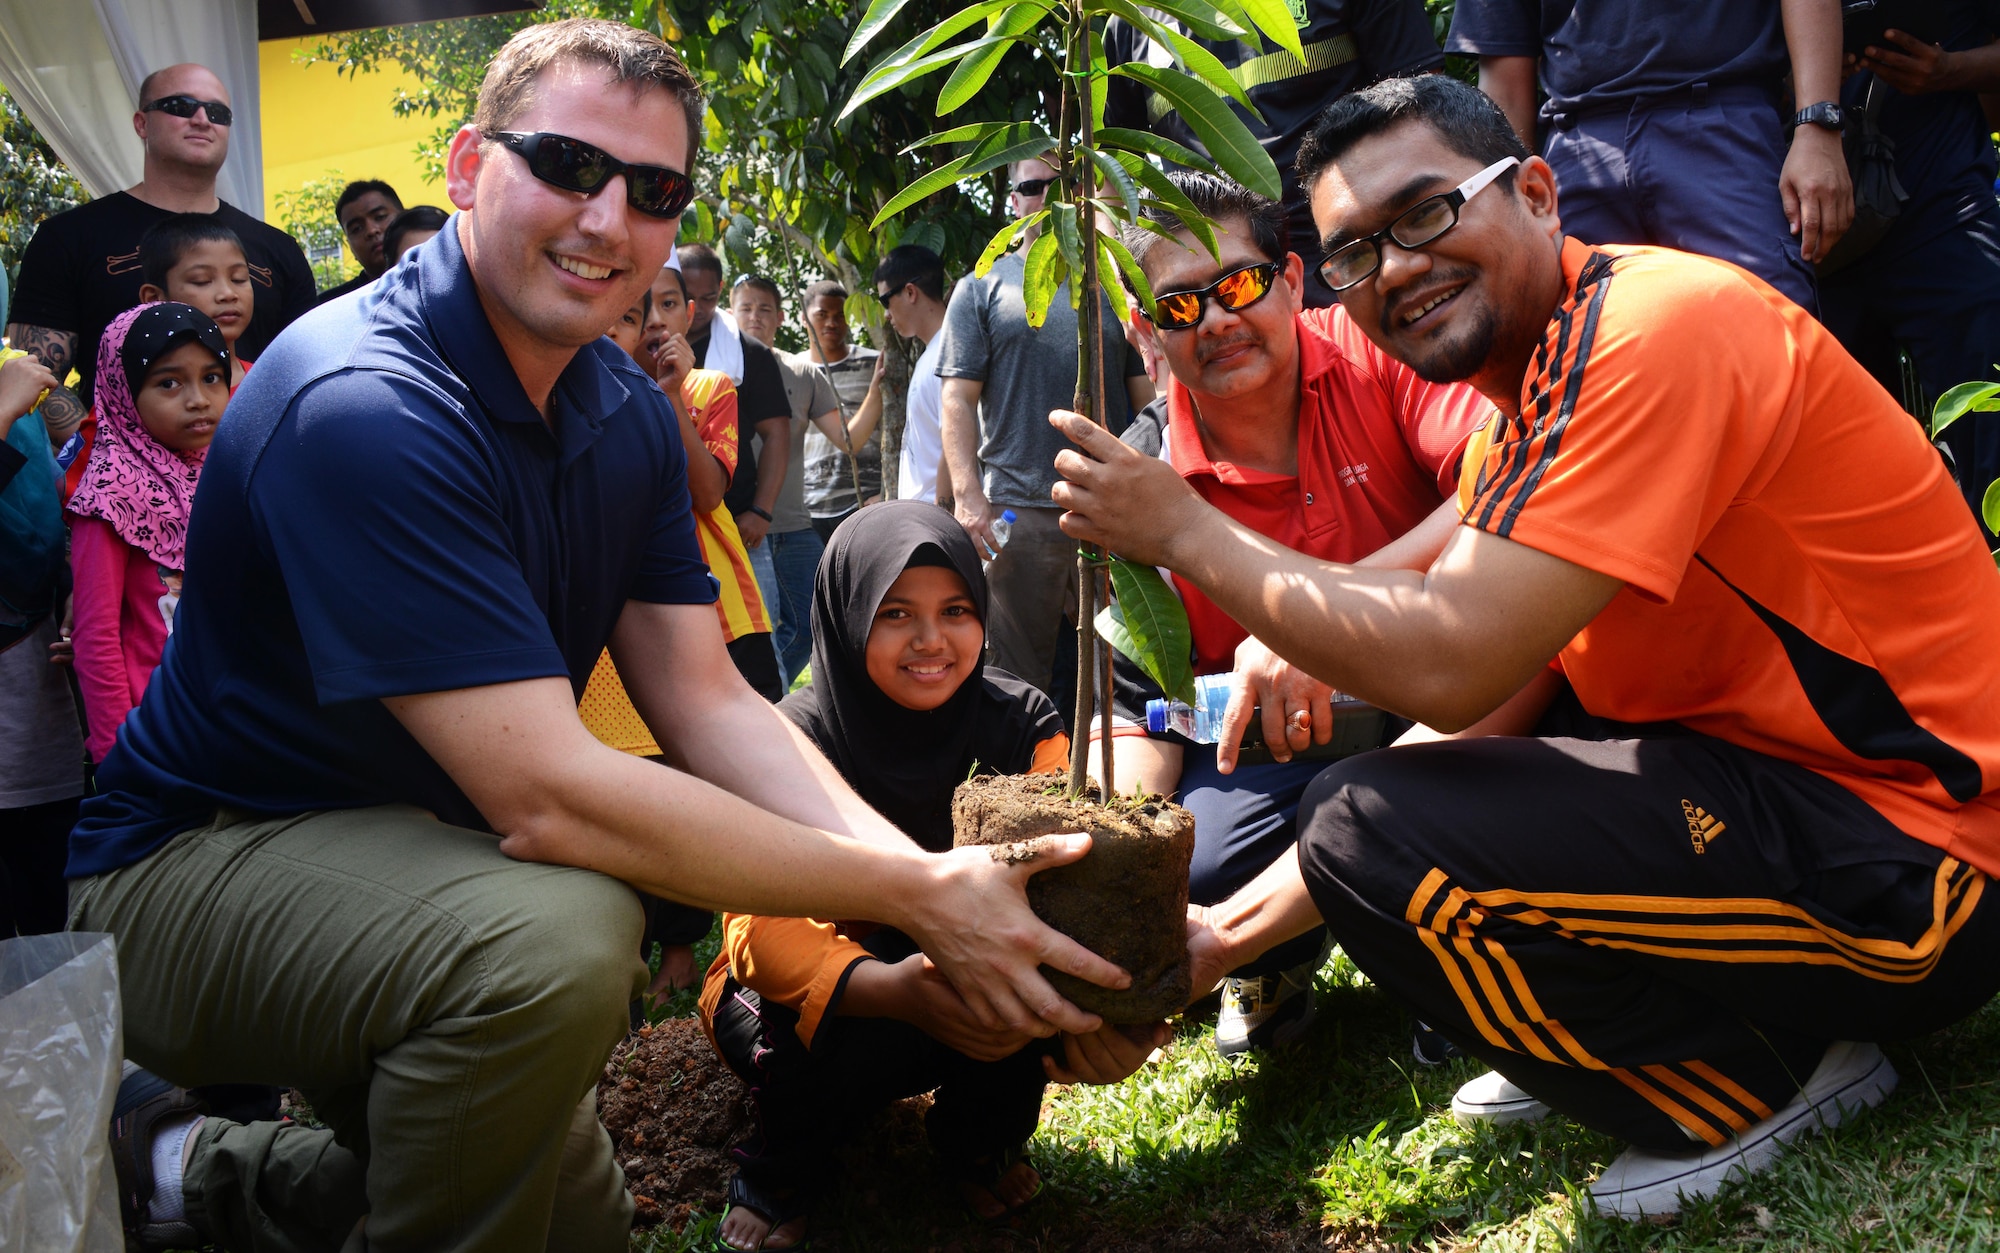 A member from the 353rd Special Operations Group and the Royal Malaysian Air Force play soccer with the children at the Rumah Kasih Hormoni Orphanage near Kuala Lumpur, Malaysia, June 6, 2015.  As part of Exercise Teak Mint, members from the RMAF, U.S. Air Force came together to help with repairs around the orphanage and donated more than $1,000 in clothes, games and sports equipment.  (U.S. Air Force photo by Tech. Sgt. Kristine Dreyer)